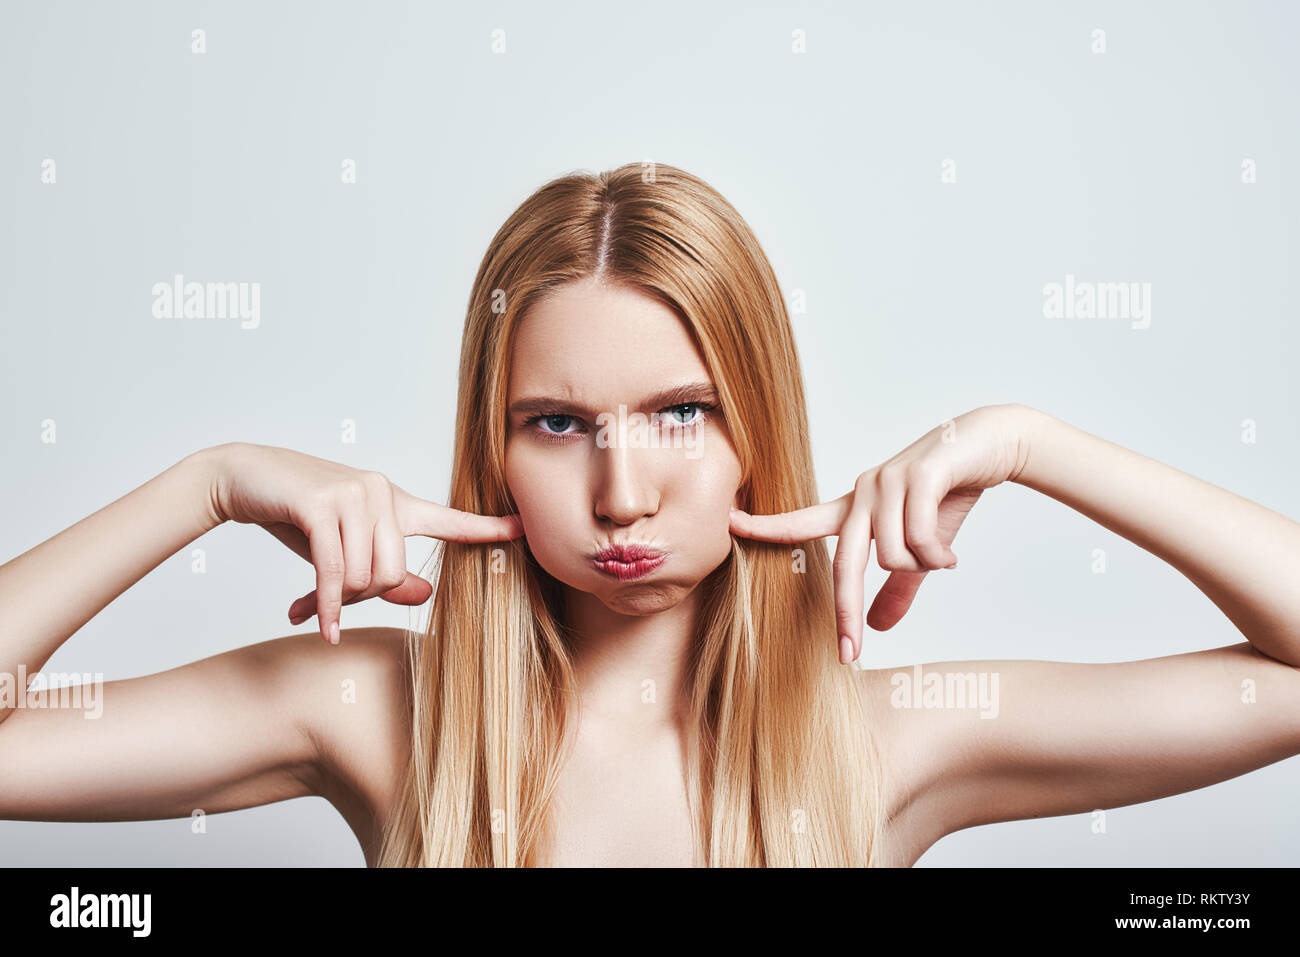 Studio shot of stubborn young blonde woman blowing cheeks and feeling mad. Human emotions. CLose-up Stock Photo